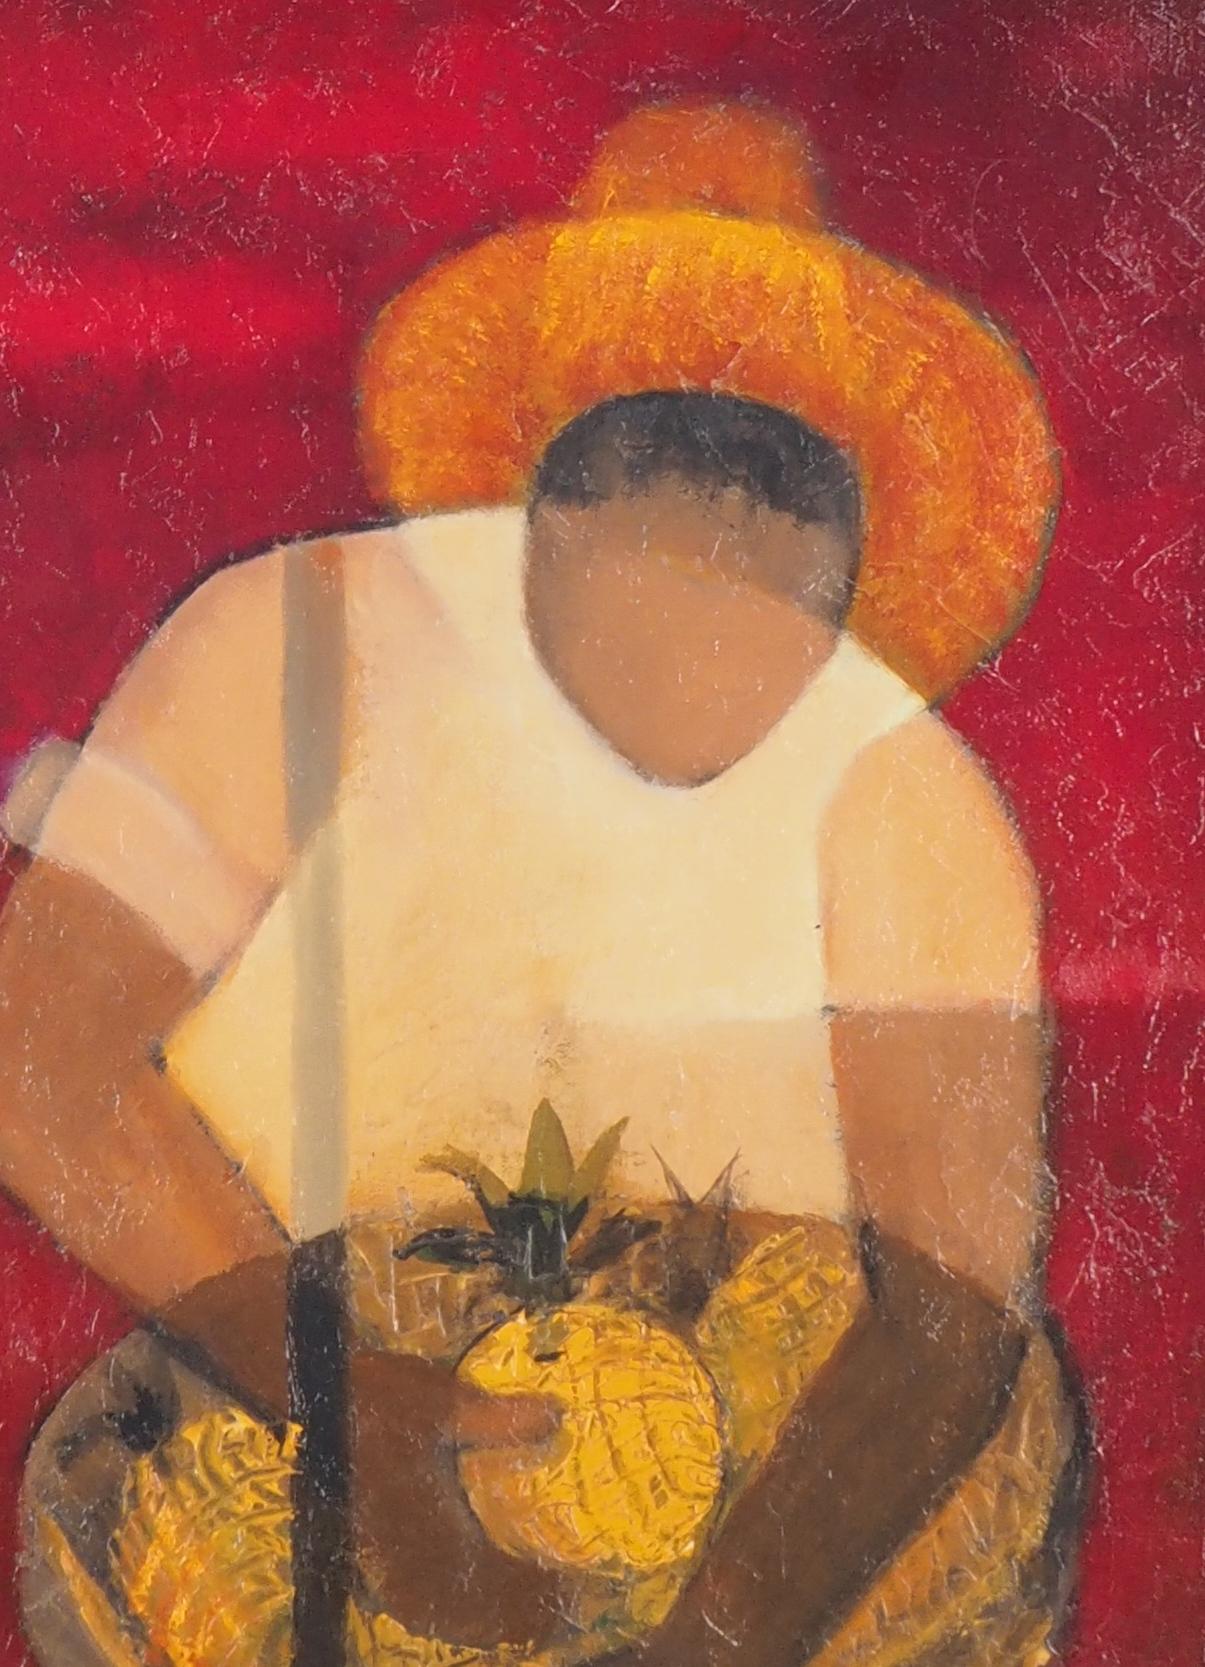 Brasil : Man with Pineapple - Original oil  on canvas painting - Signed - Brown Figurative Painting by Louis Toffoli